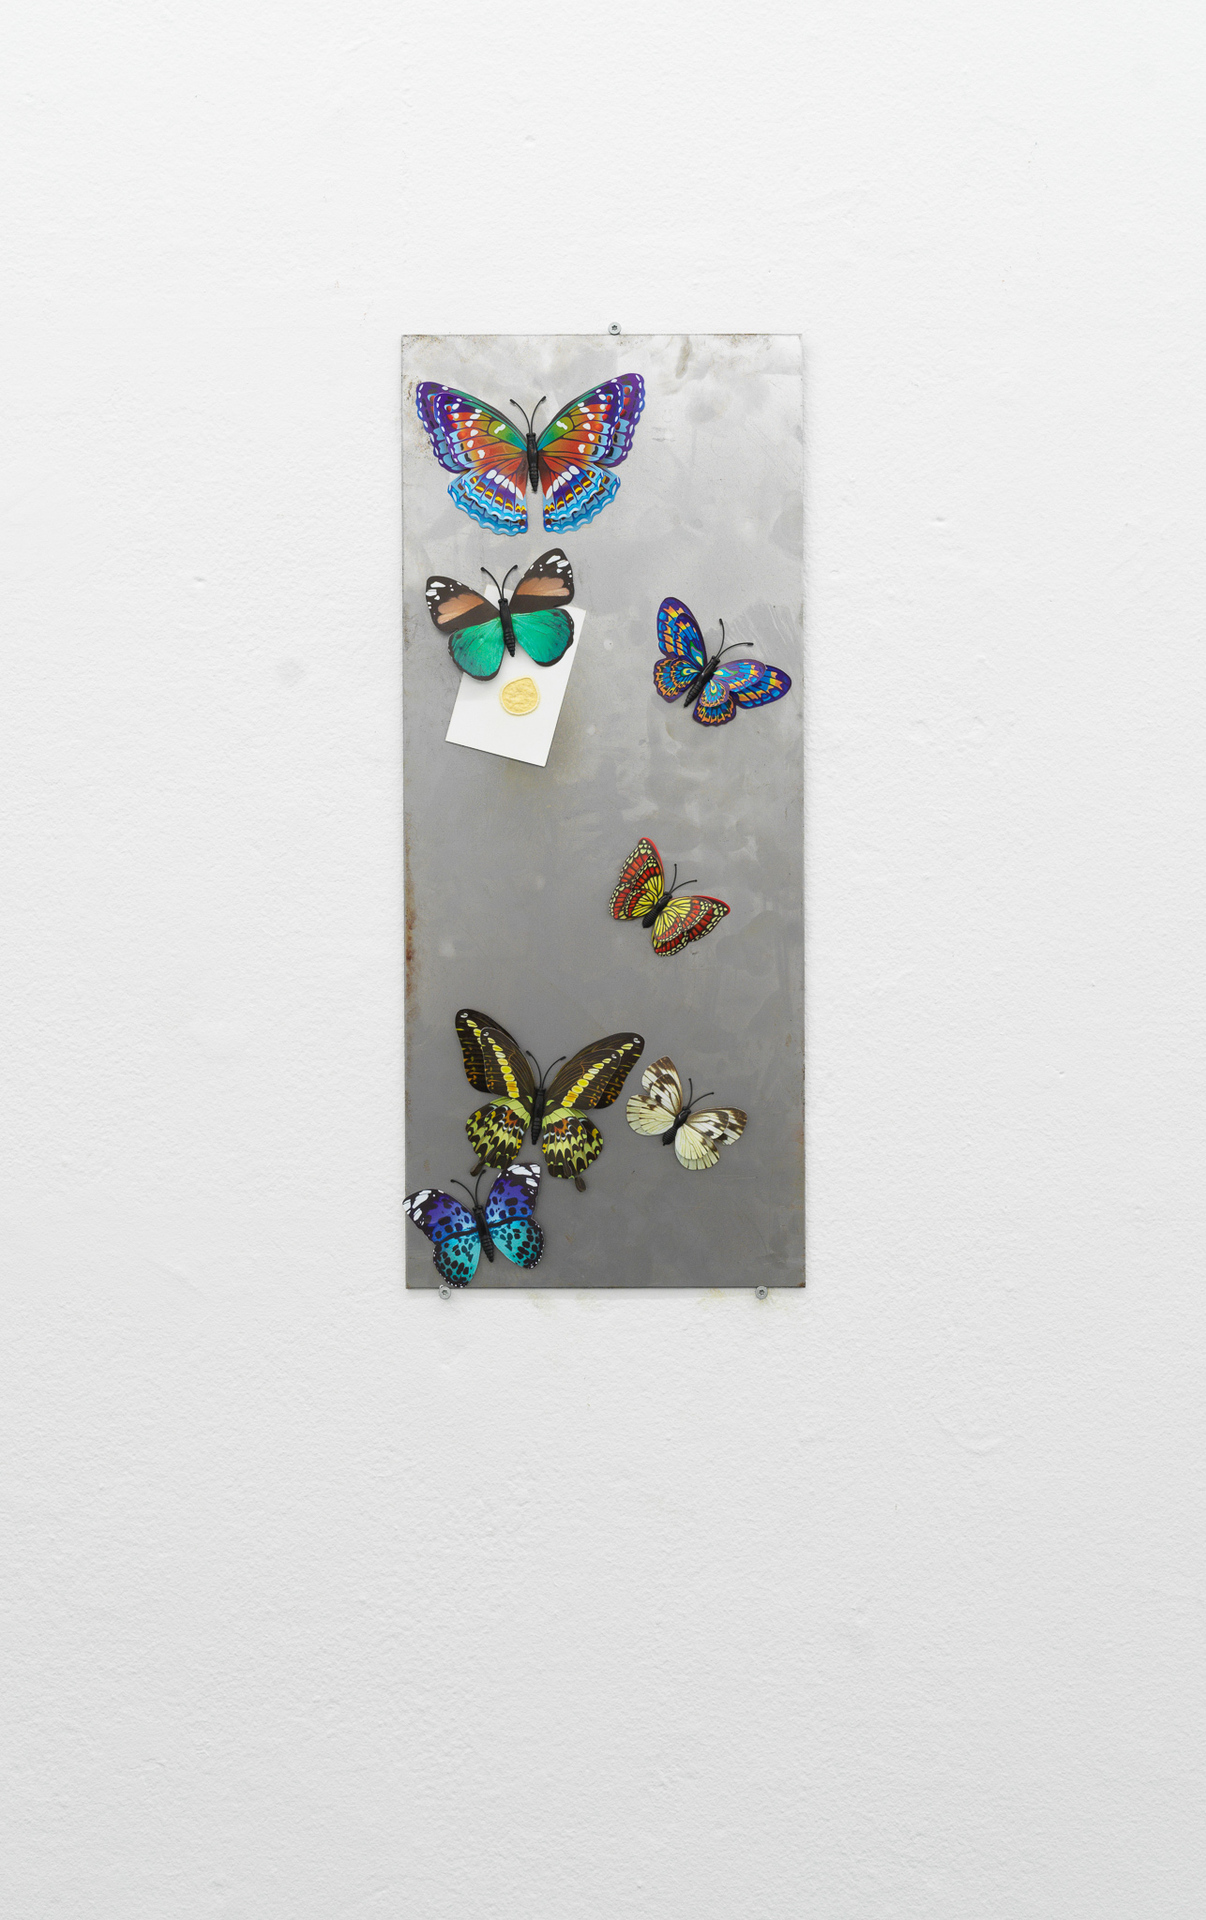 Artist: Theodor Nymark  Title: Bulletin. 1  Year: 2021  Materials: Magnetic butterflies &amp; businesscard from Le Gourmand with stain from MDMA purification testkit attached to iron plate.